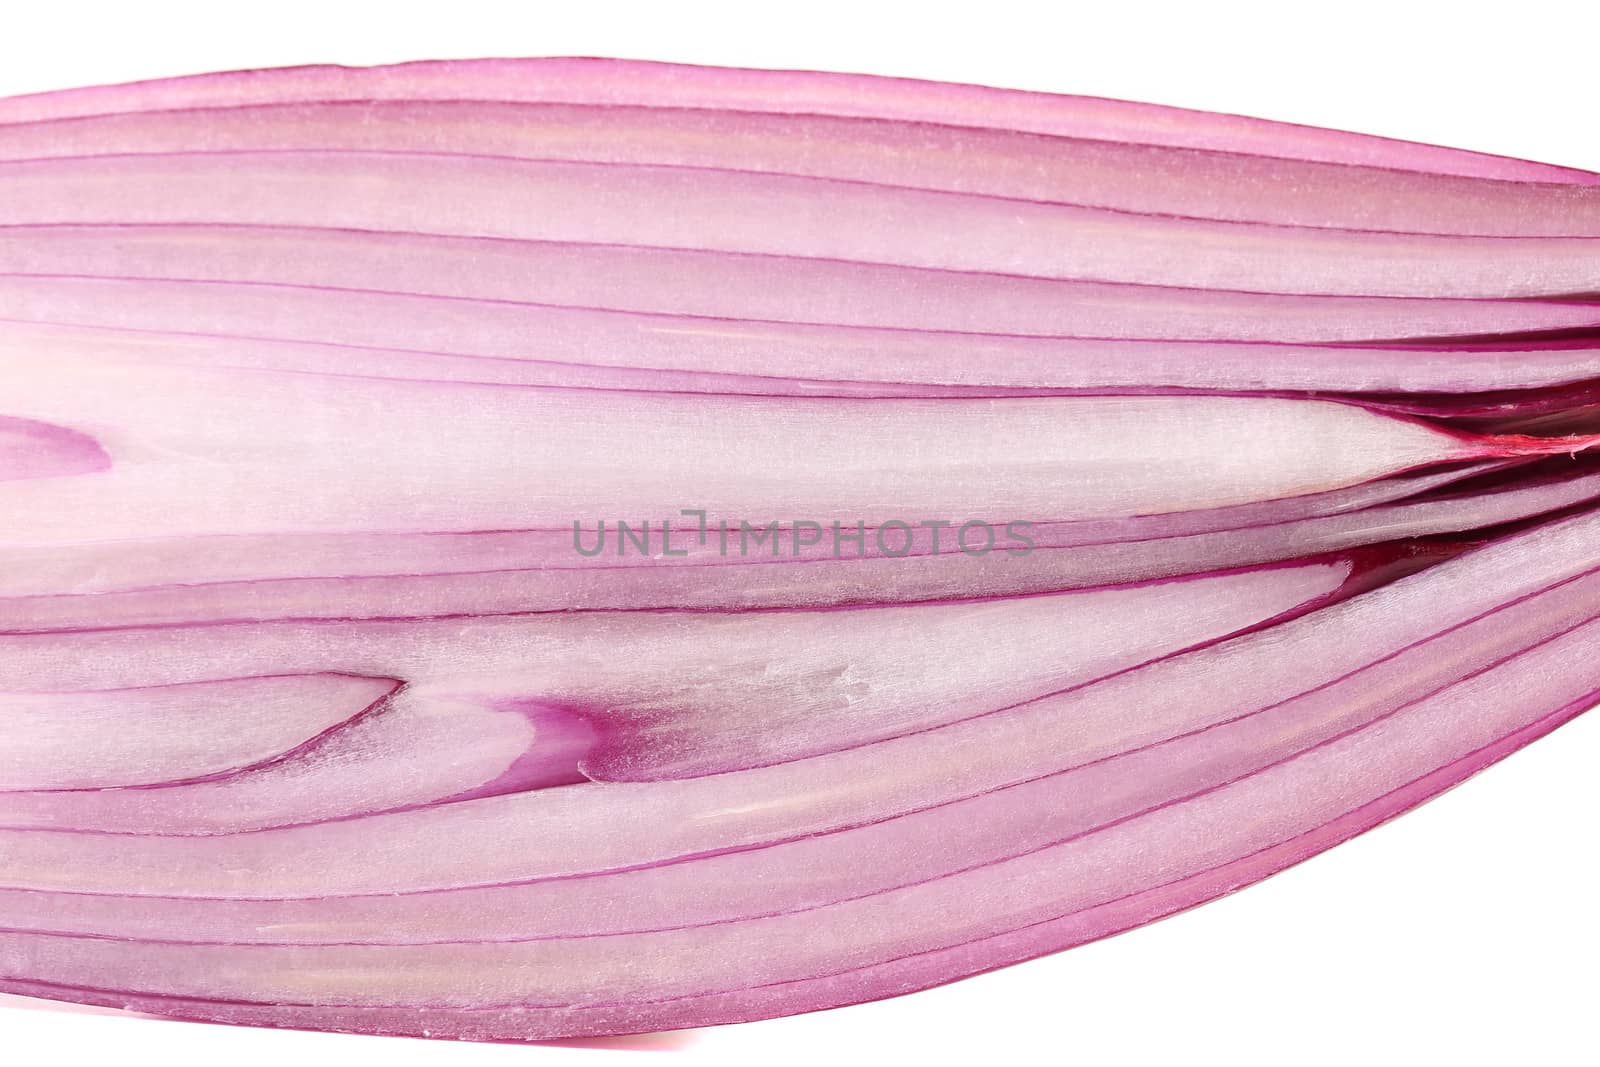 A red onion, sliced in half, isolated on white background